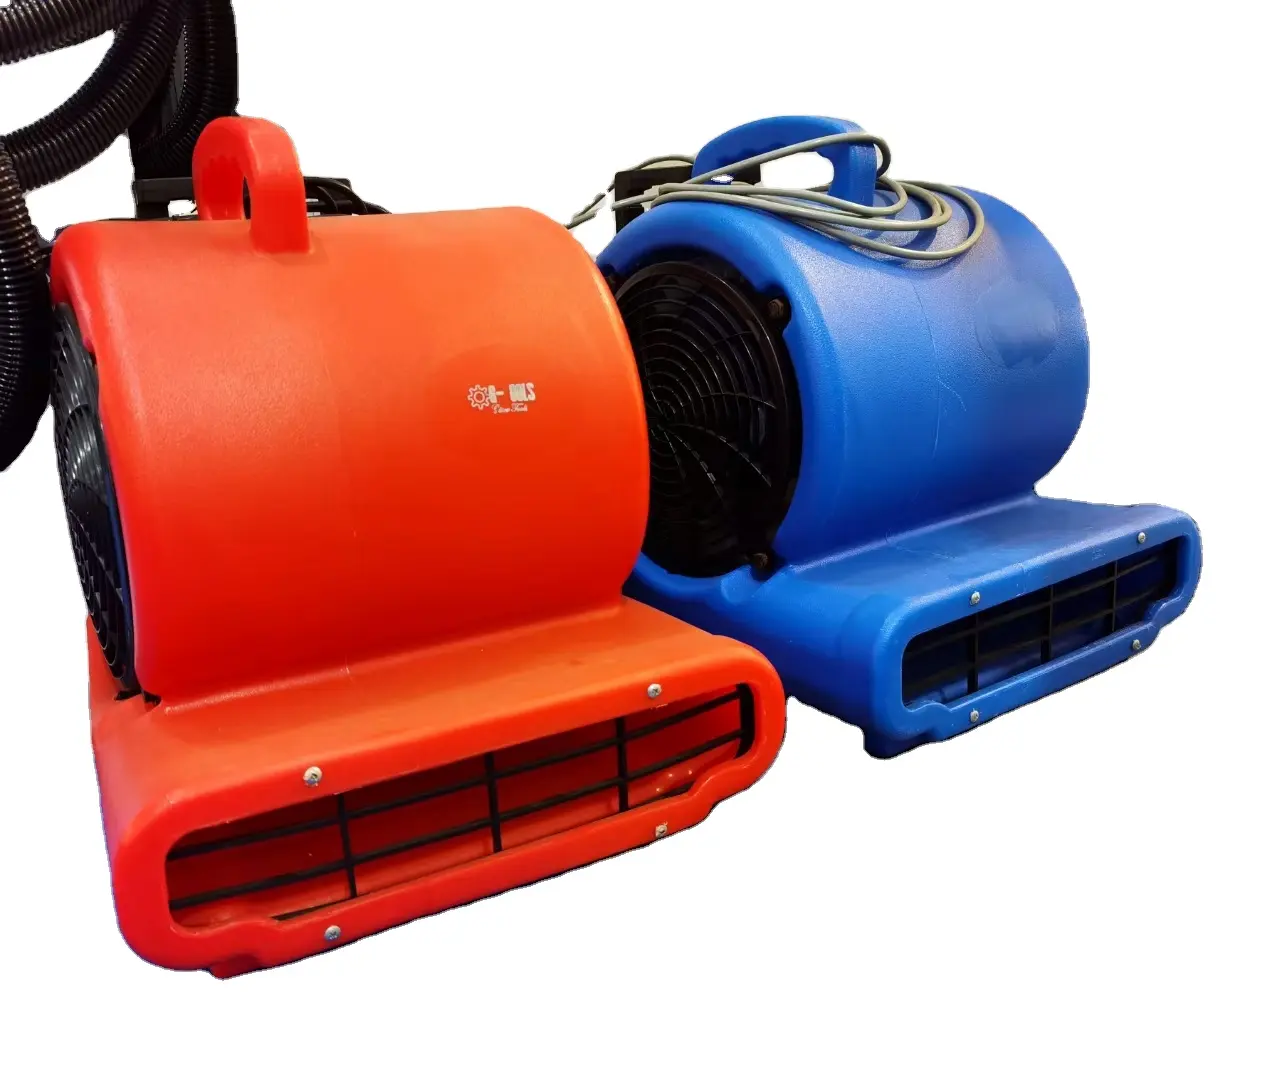 Portable Industrial Best Dry Cleaning Machines Commercial Carpet Dryer Blower Floor Air Mover Carpet Drying Fan